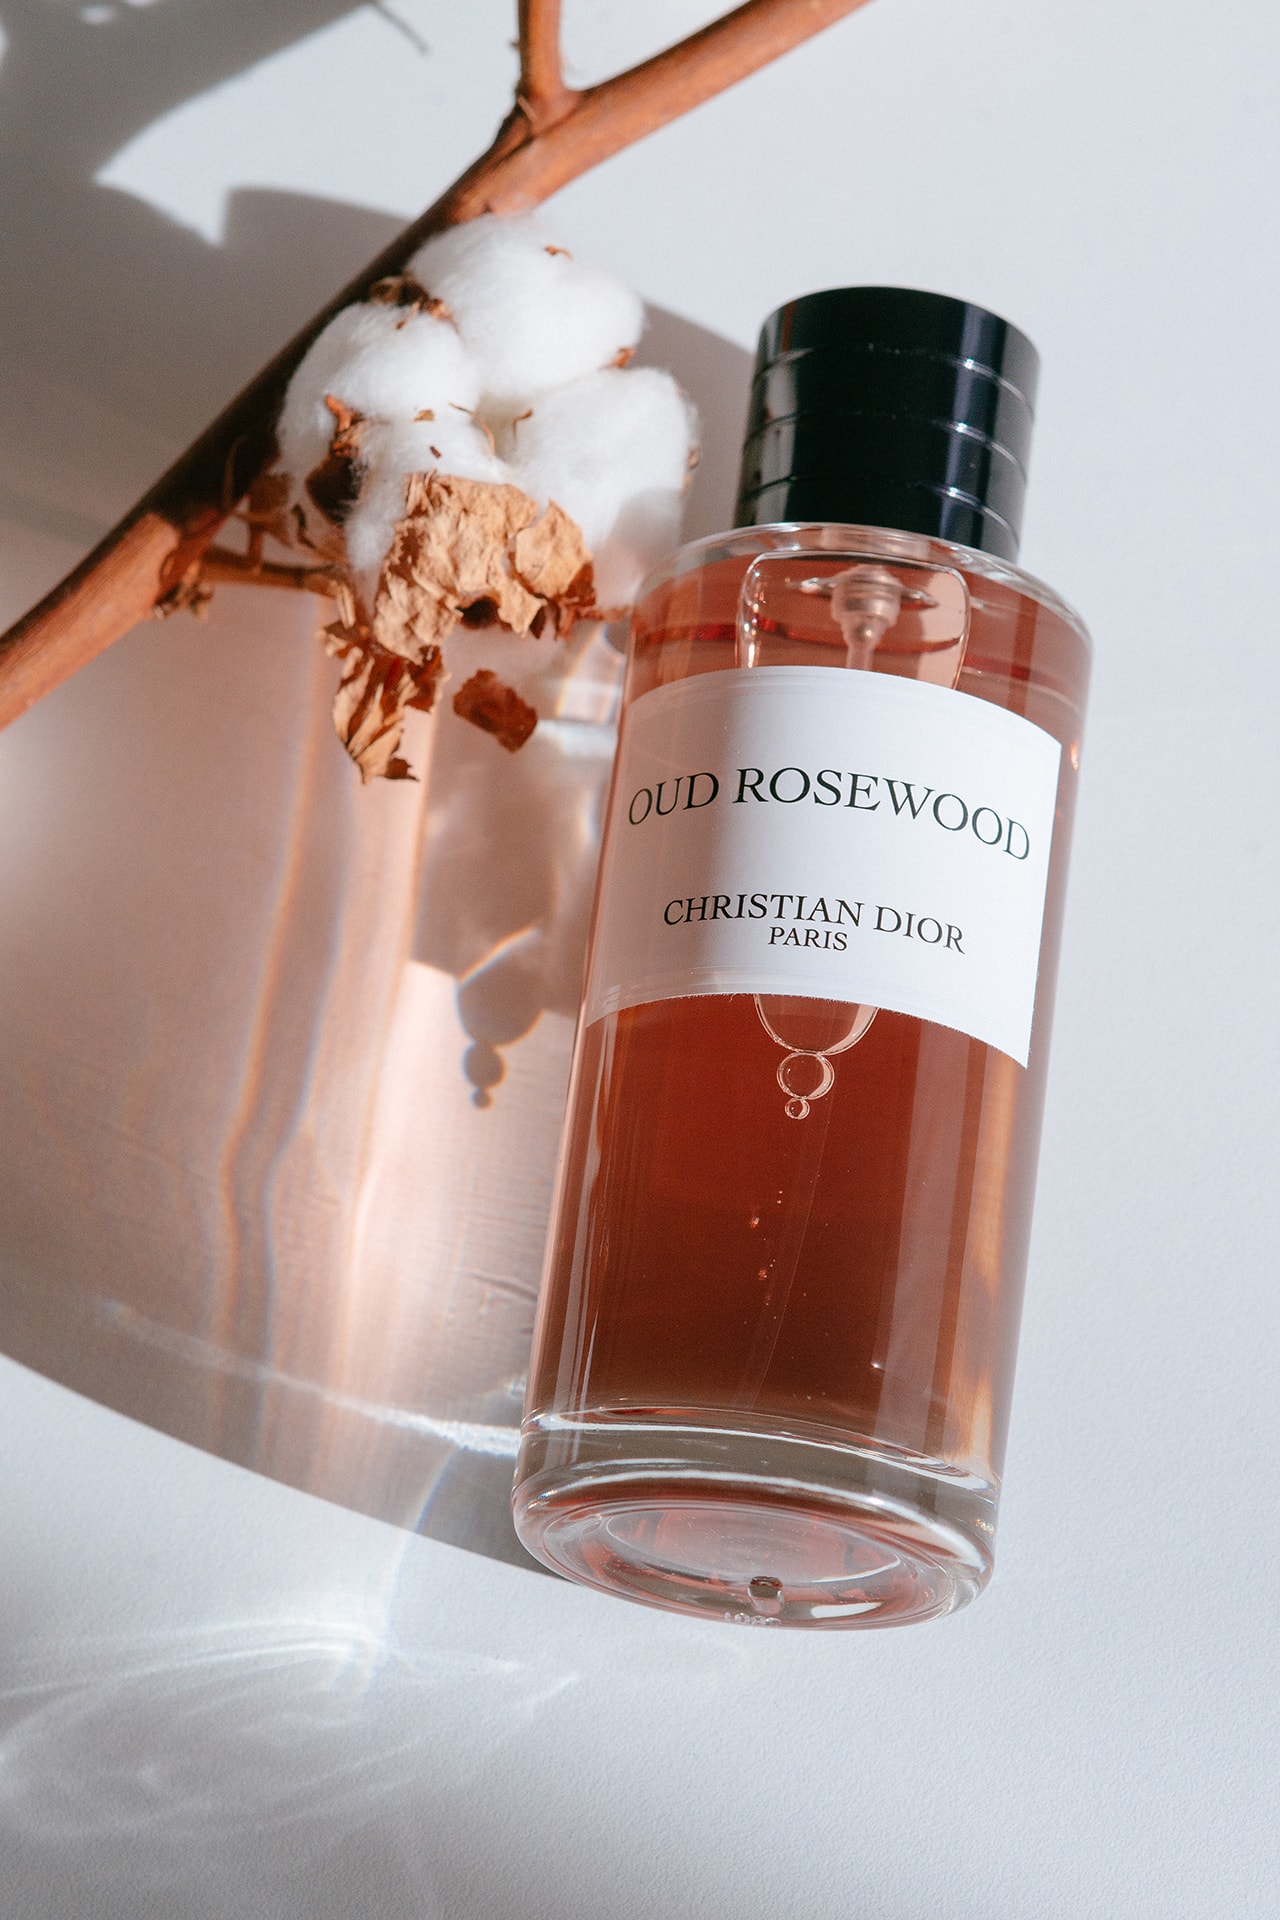 Maison Christian Dior Oud Rosewood Fragrance Perfume Cotton Branch